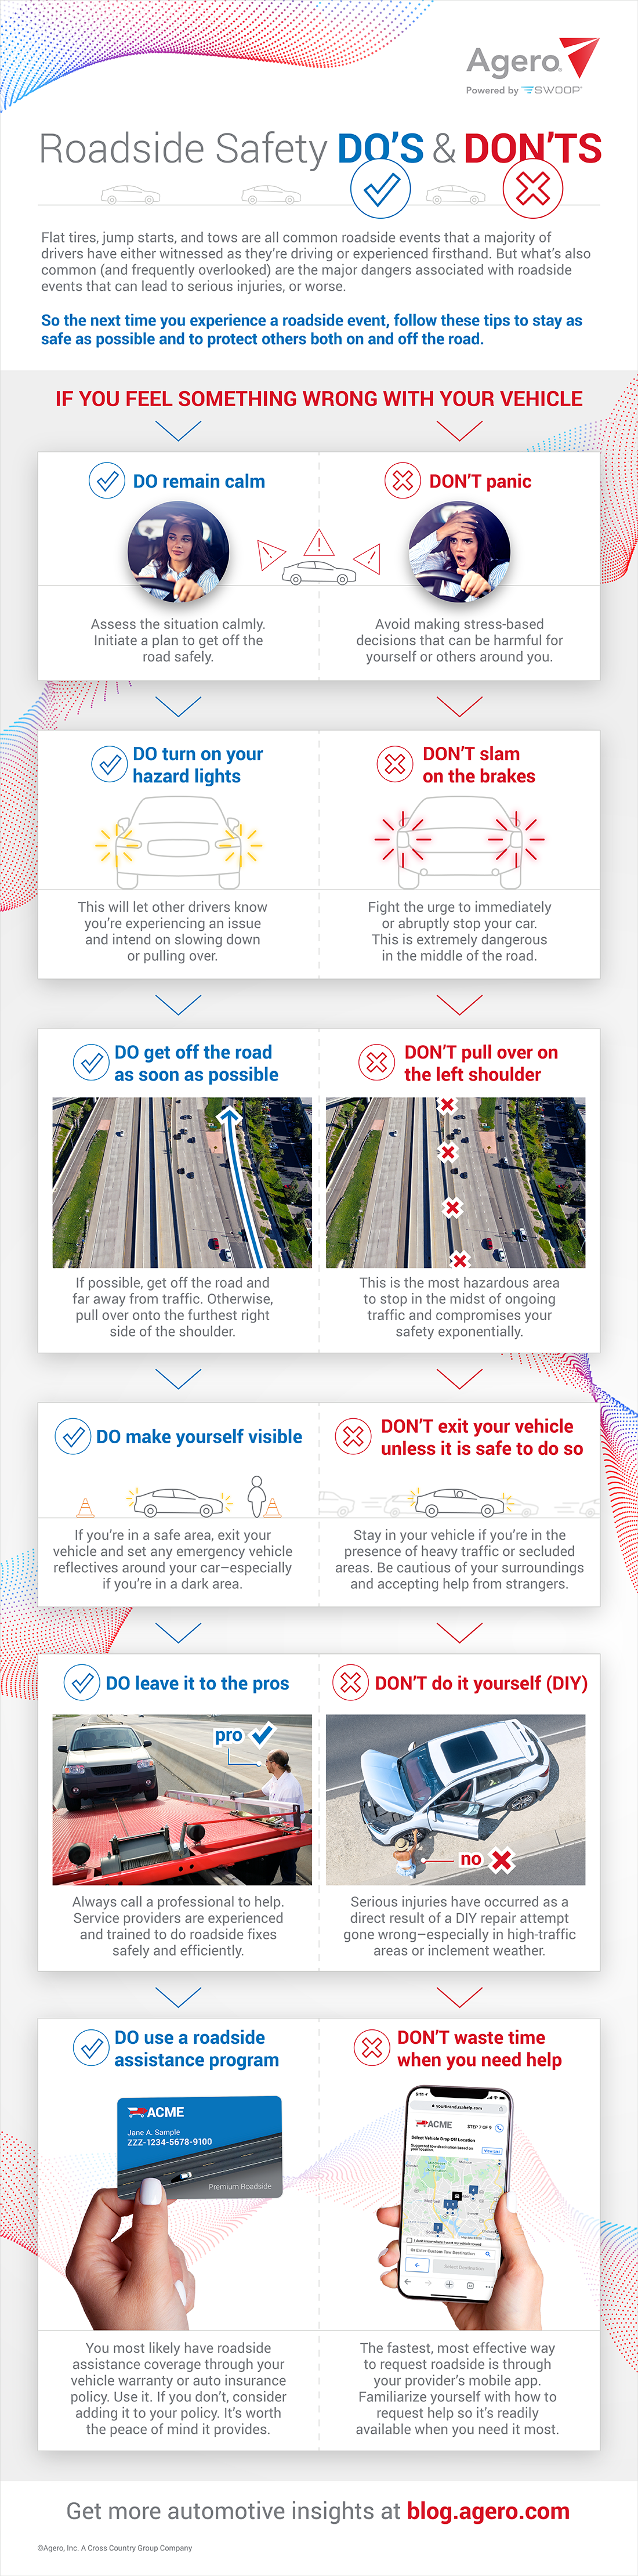 Roadside-Safety-Dos-and-Donts-Infographic